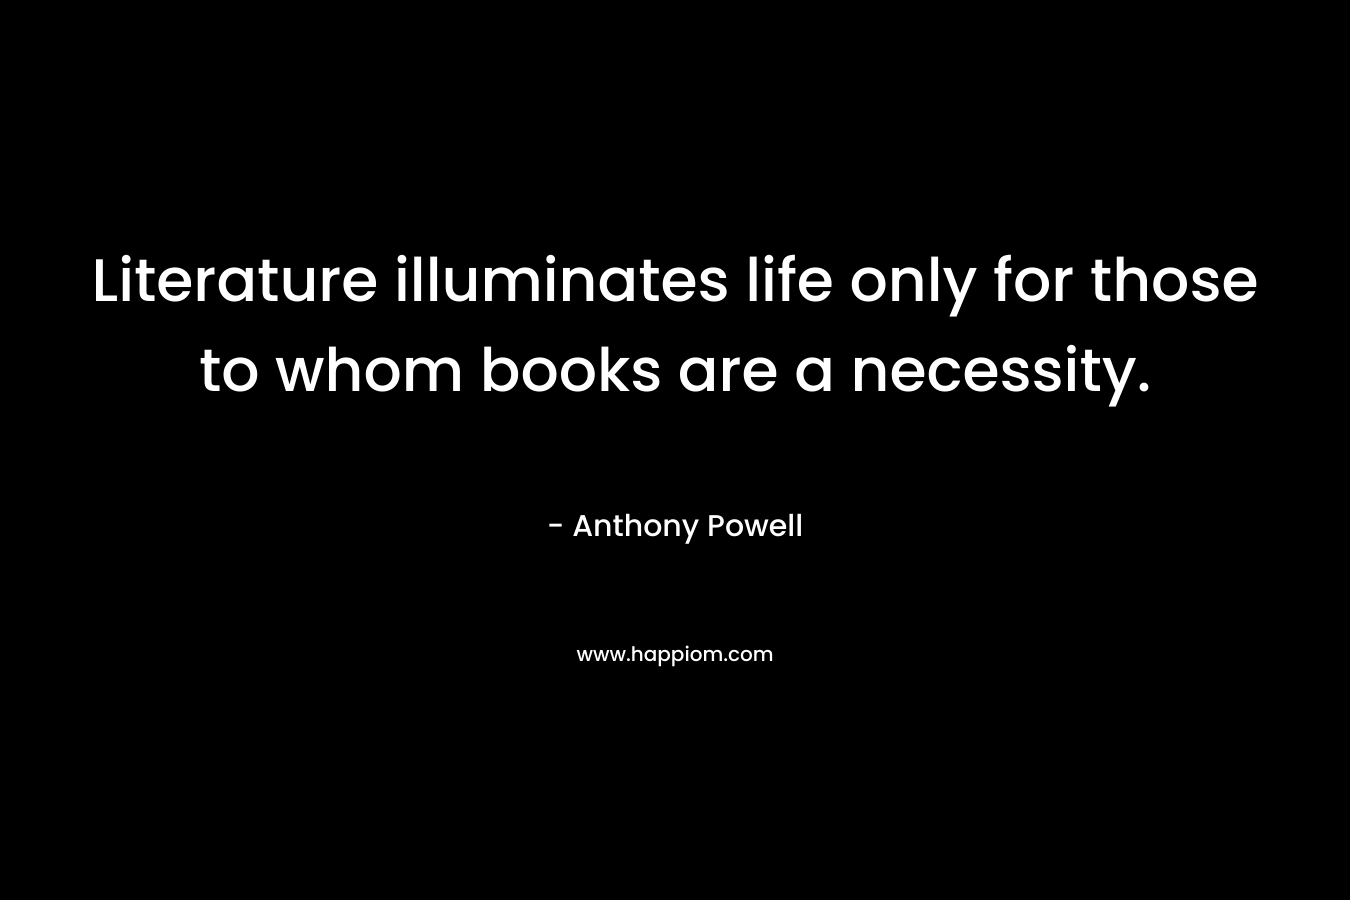 Literature illuminates life only for those to whom books are a necessity.